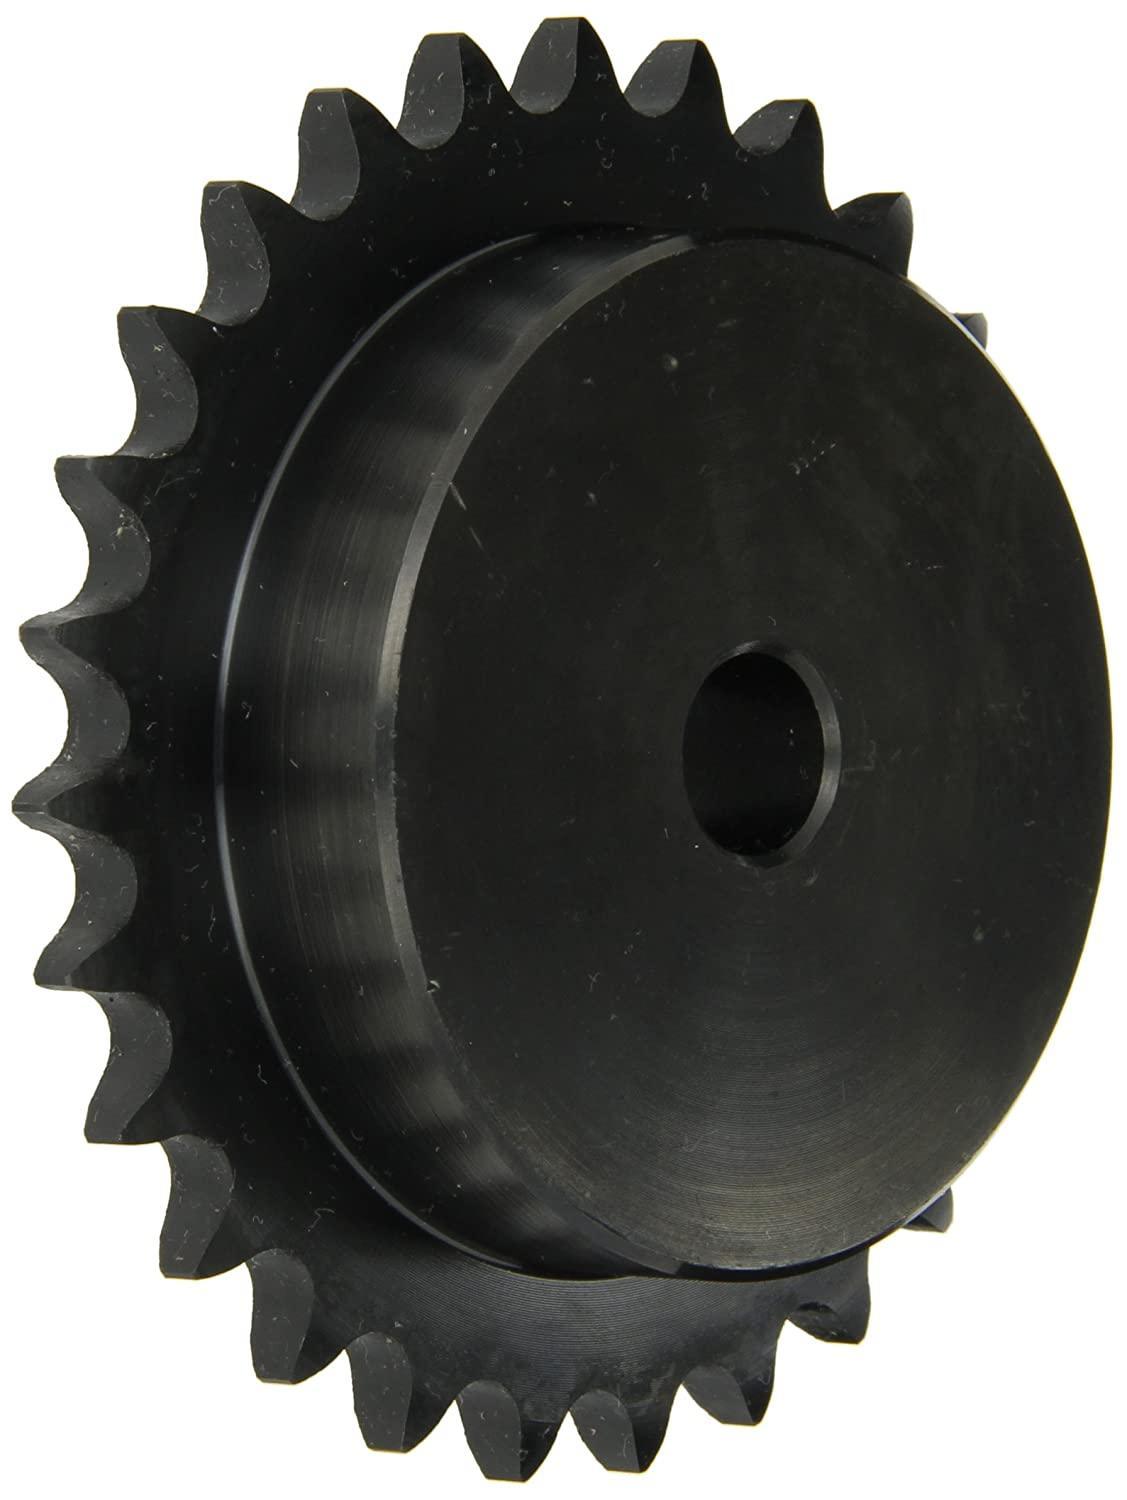 25B48 Roller Chain Sprocket With Stock Bore - Forces Inc